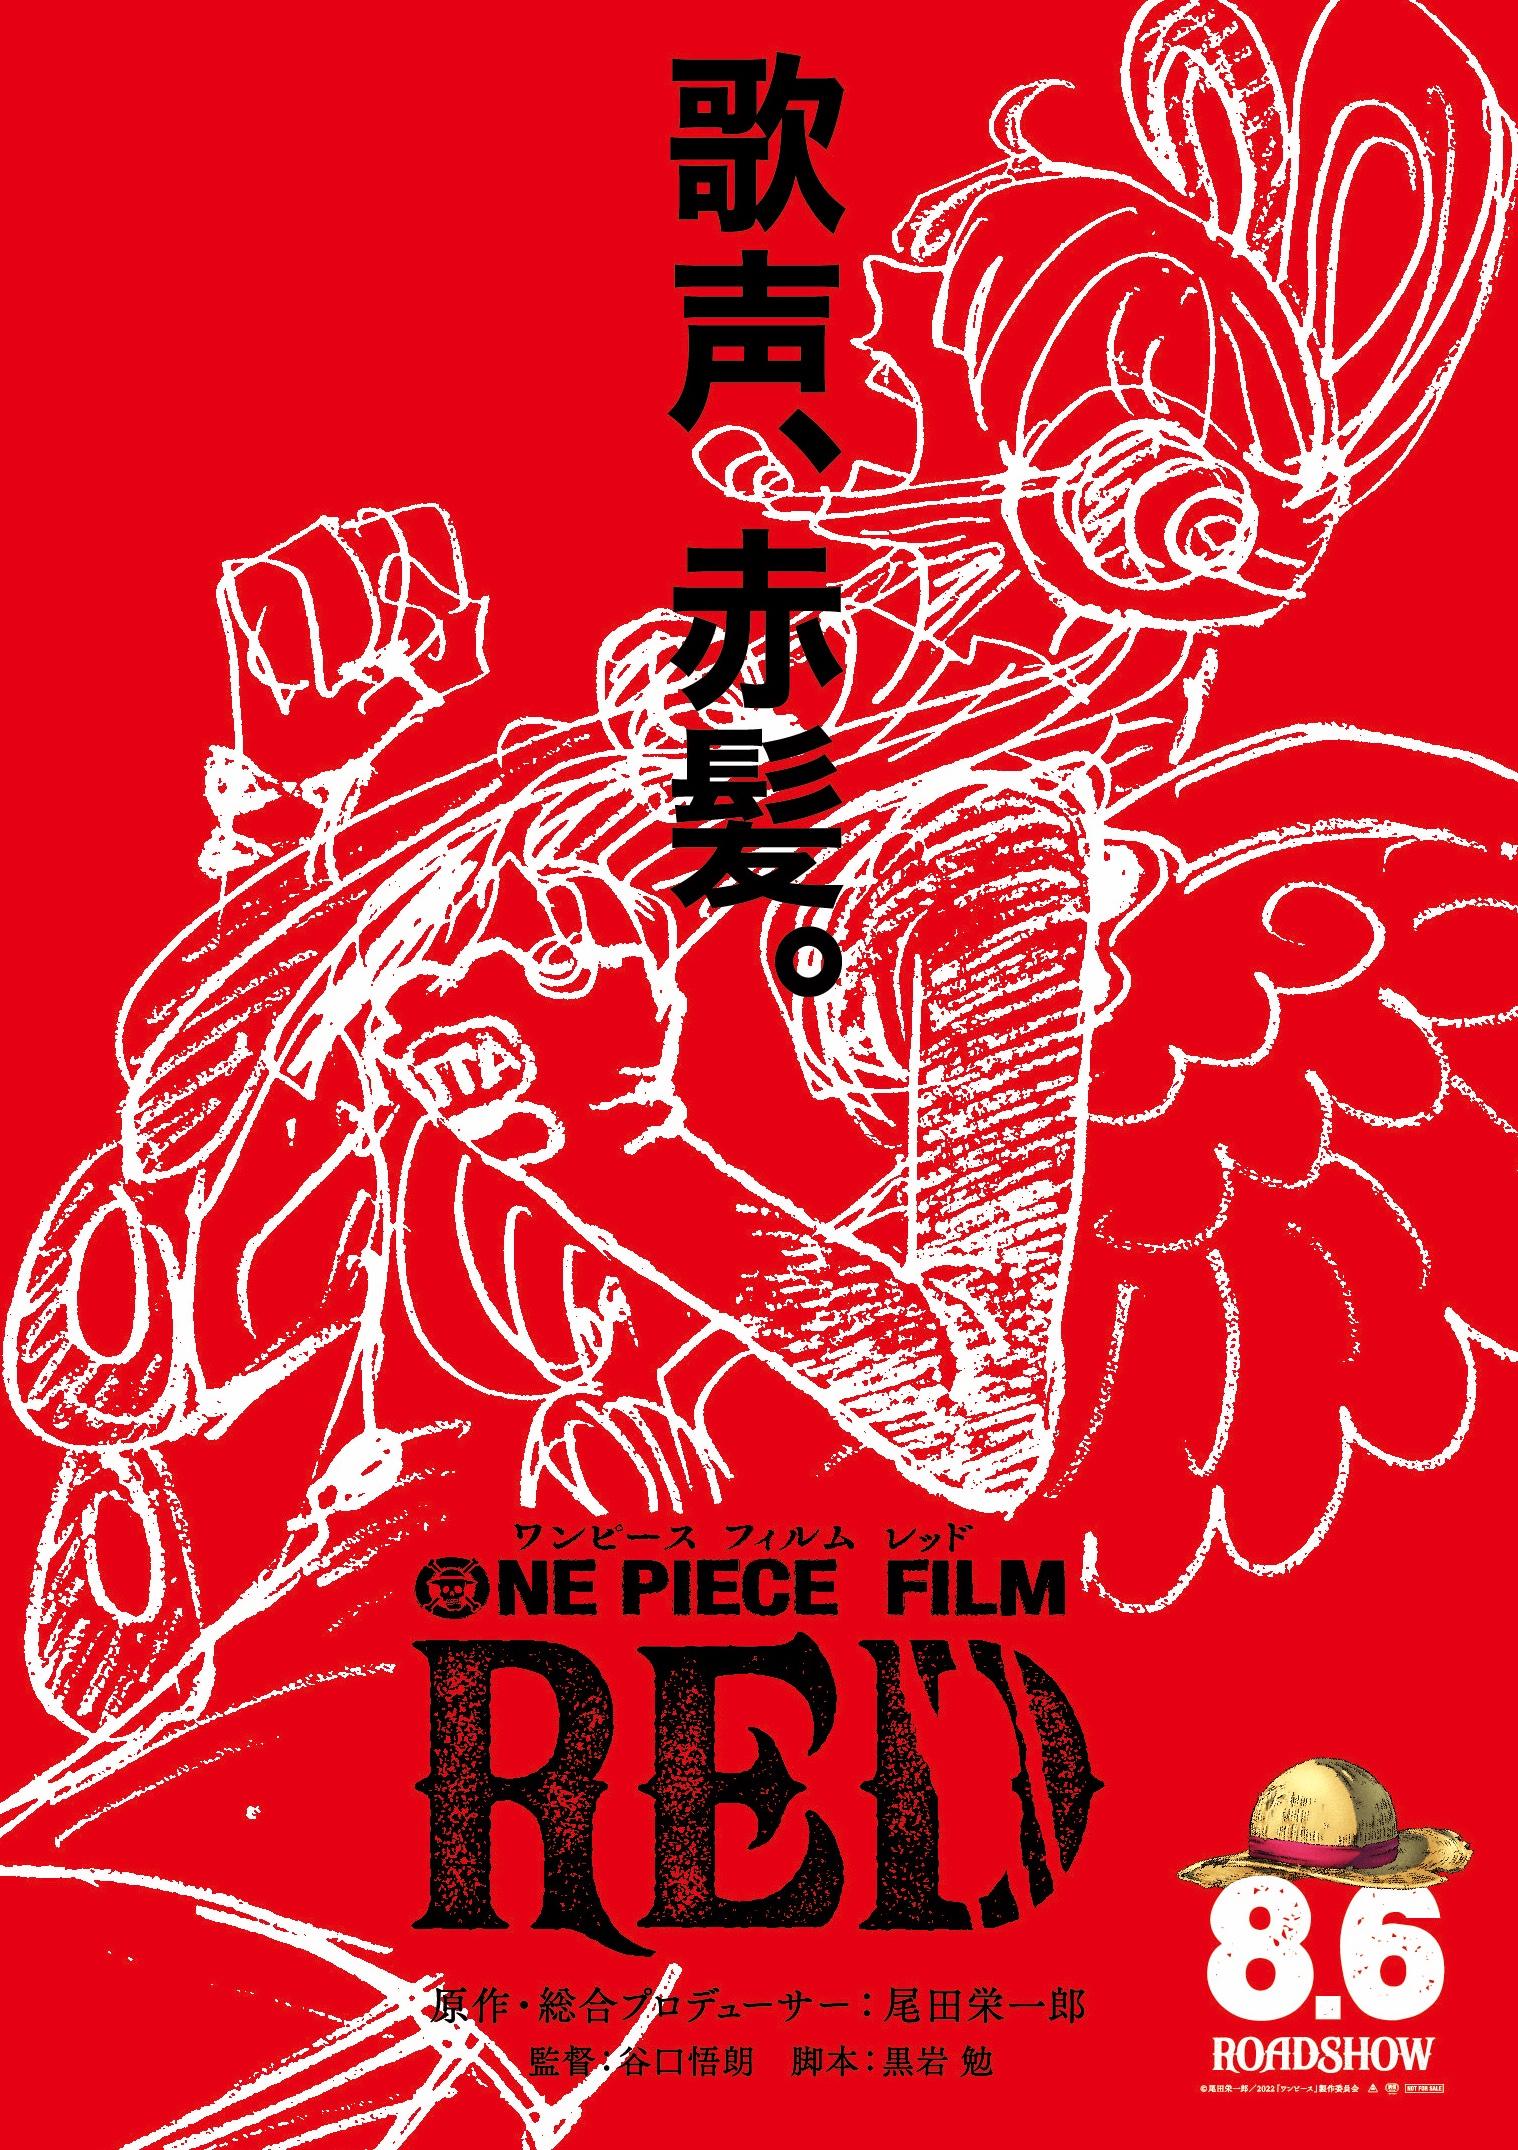 One Piece Red Film Wallpaper Iphone, One Piece Red Film, Anime